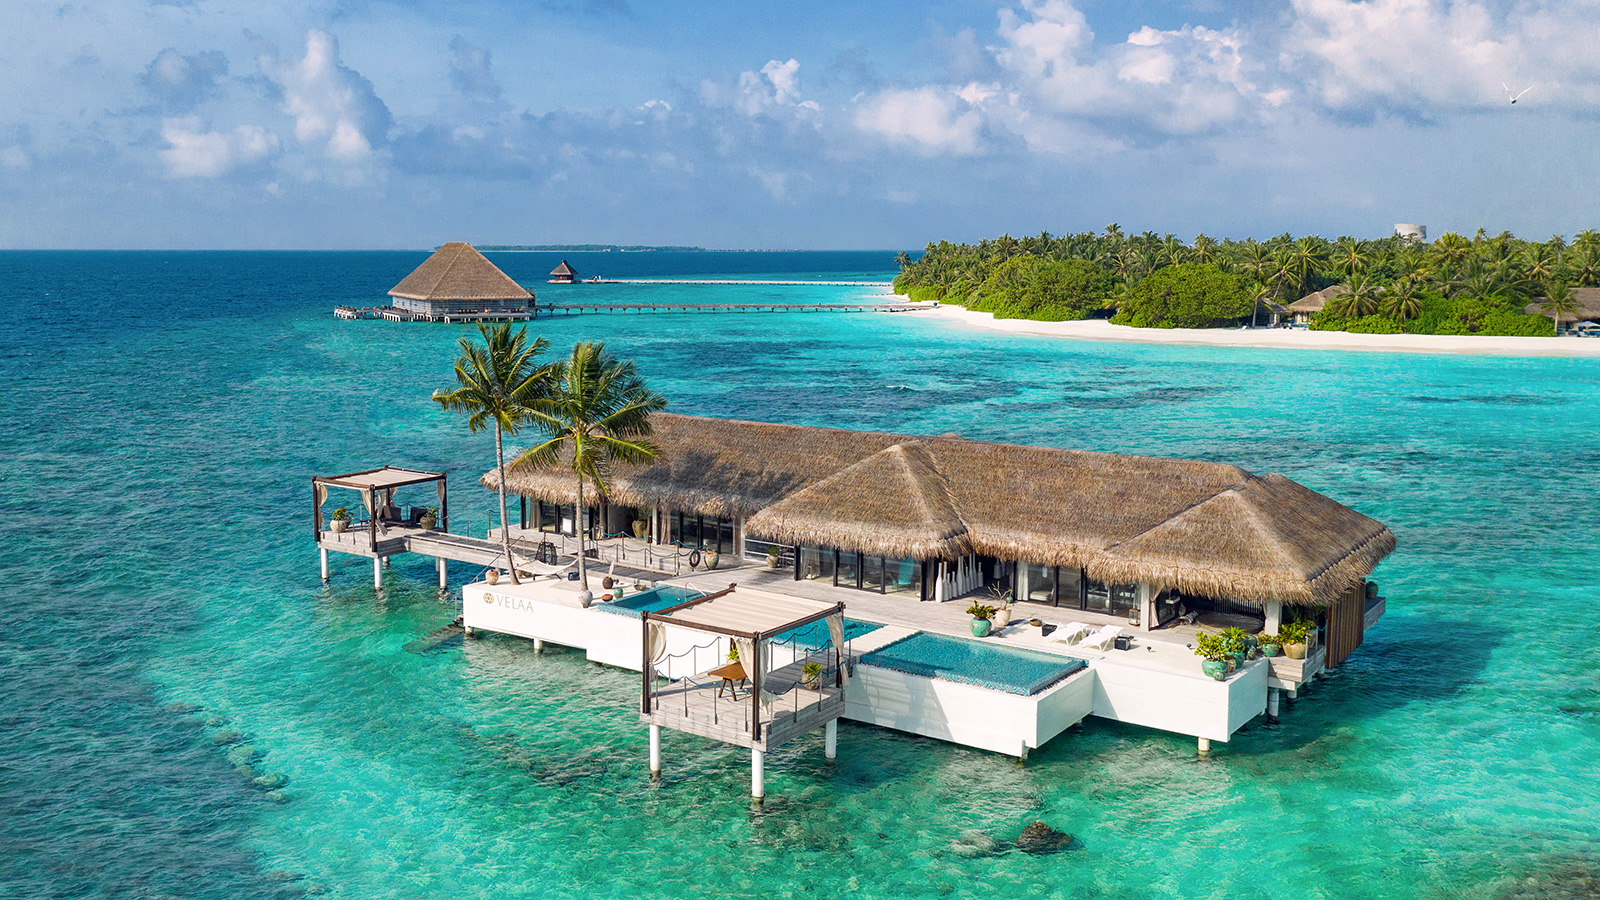 Maldives The travel industry